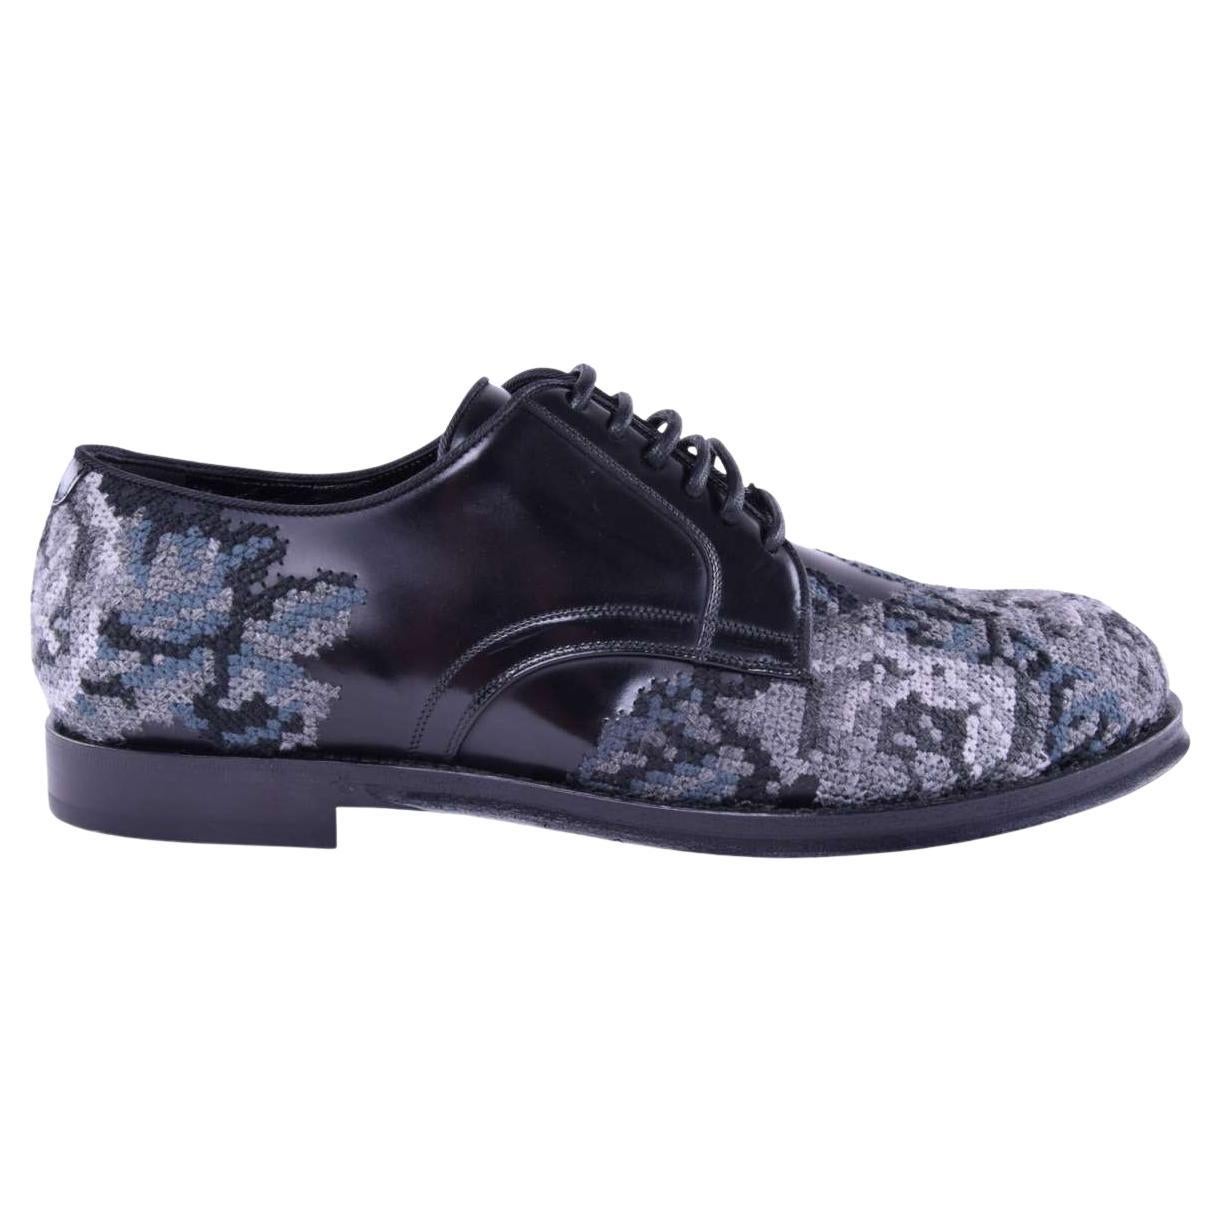 Dolce & Gabbana - RUNWAY Baroque Embroidery Shoes EUR 41.5 For Sale